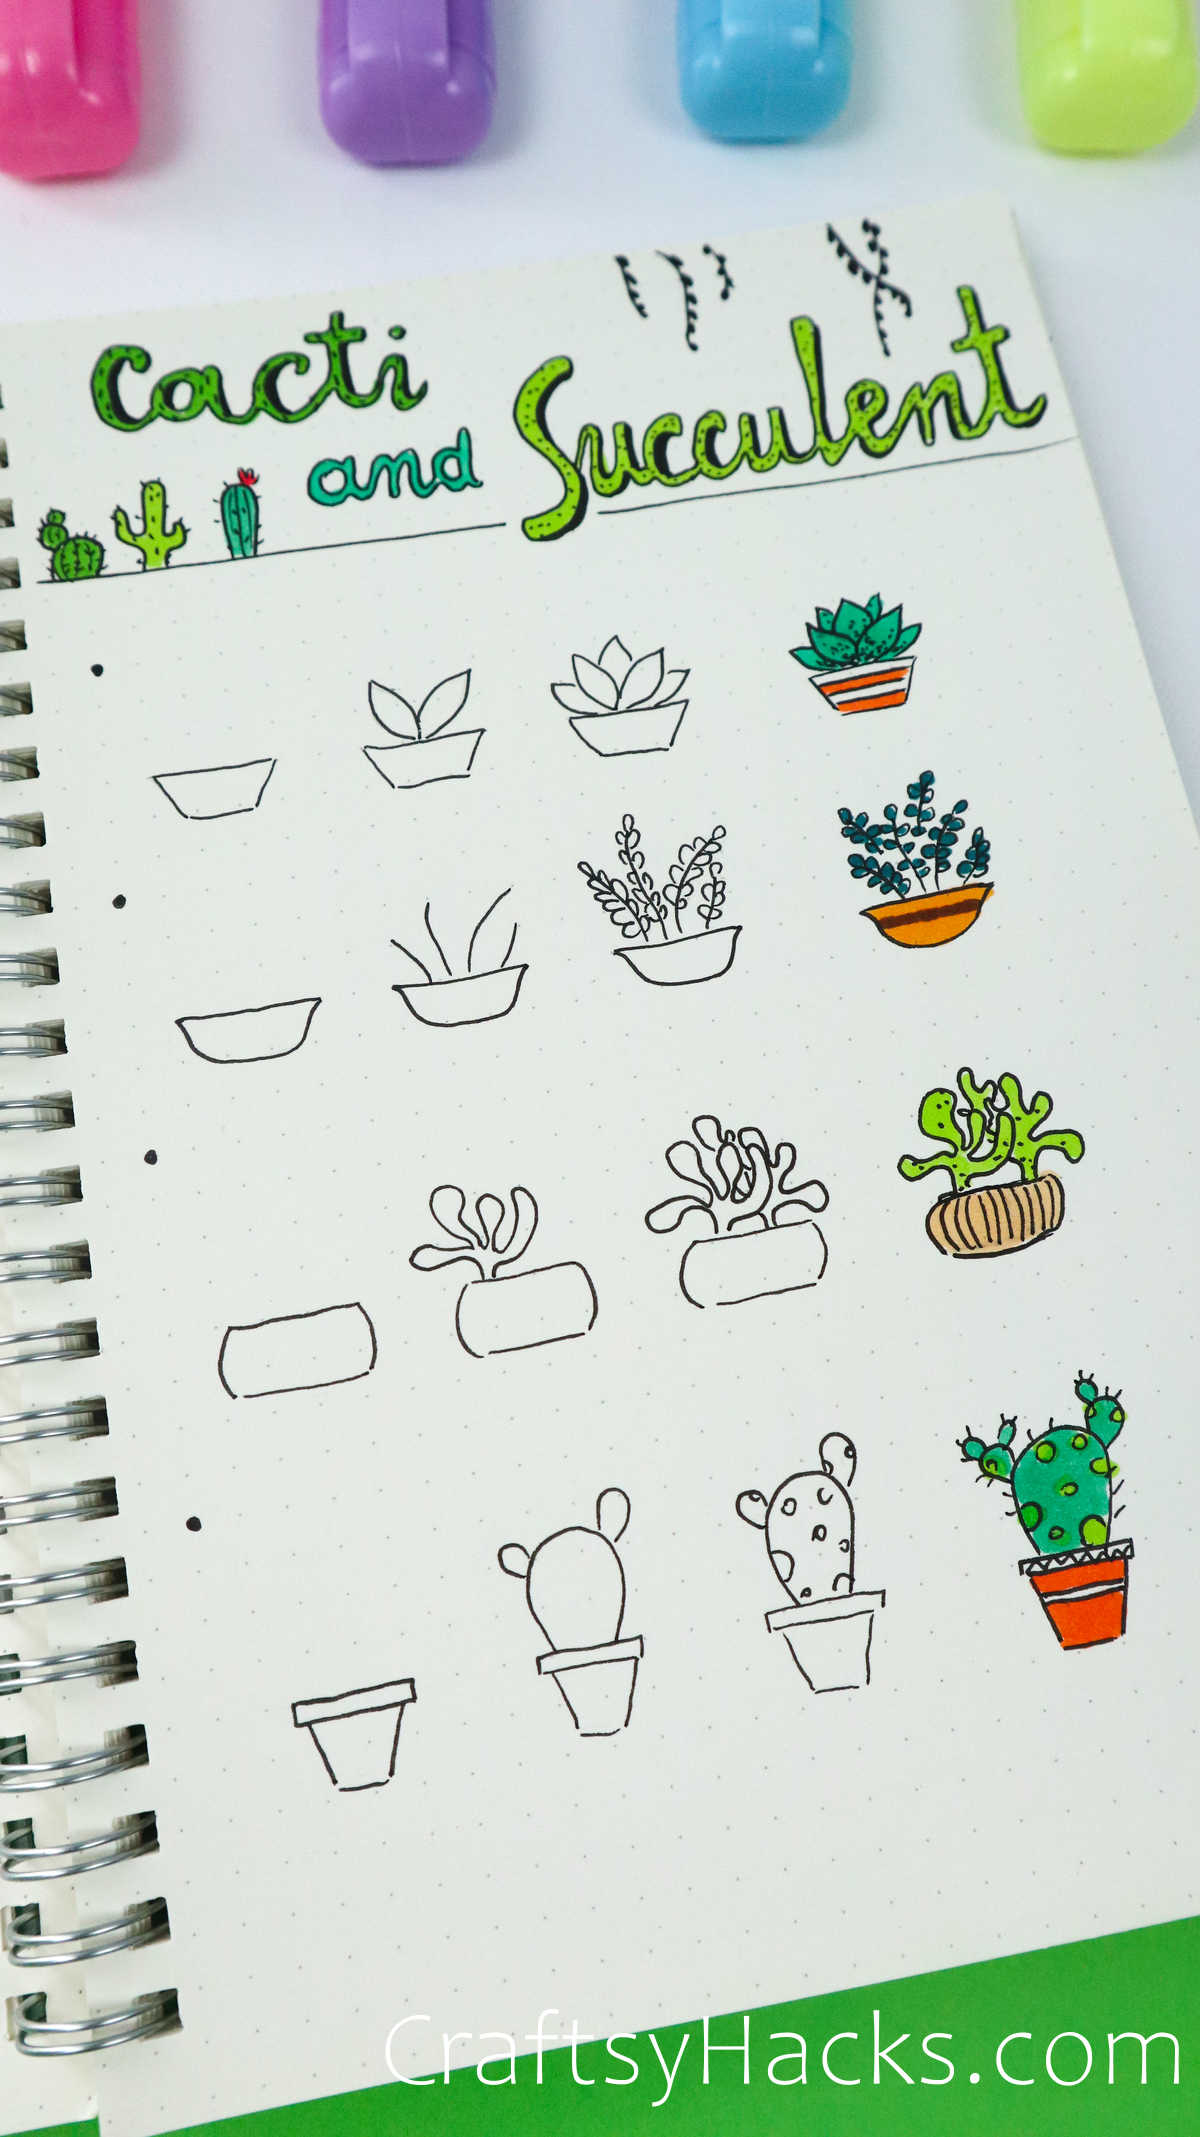 cacti and succulent doodles